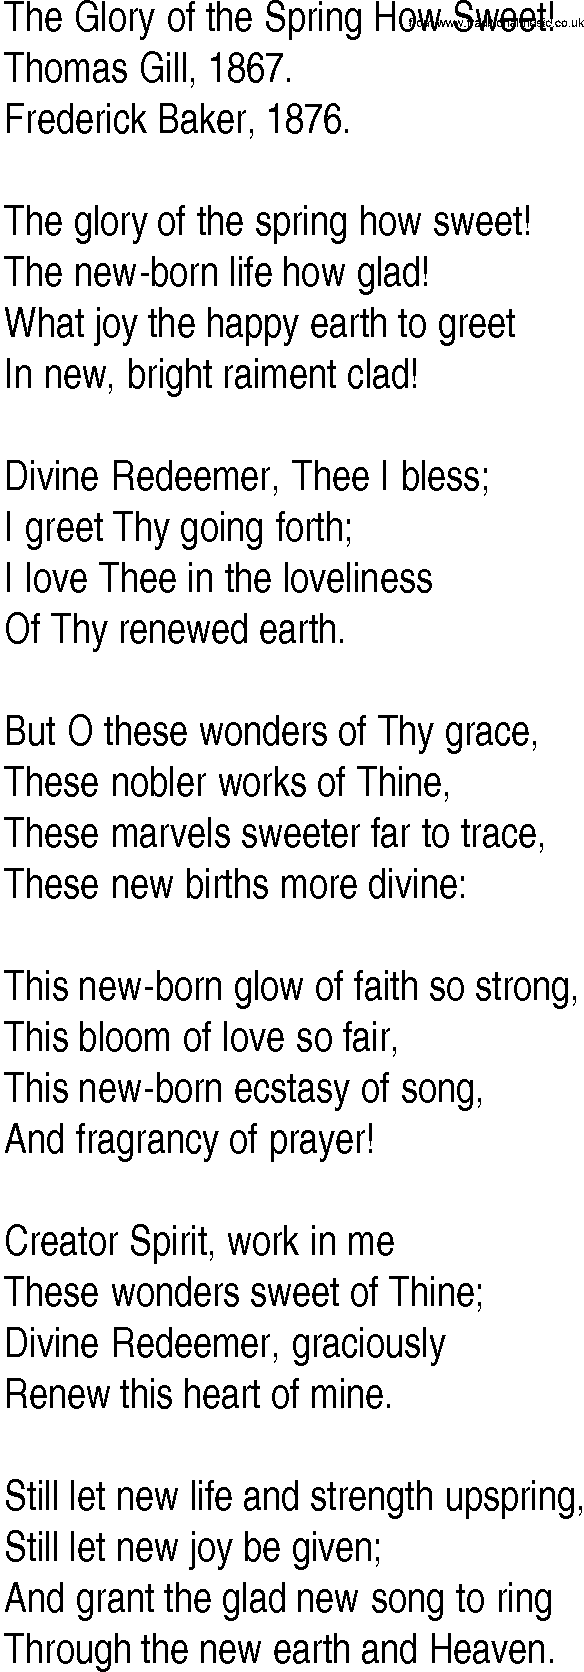 Hymn and Gospel Song: The Glory of the Spring How Sweet! by Thomas Gill lyrics